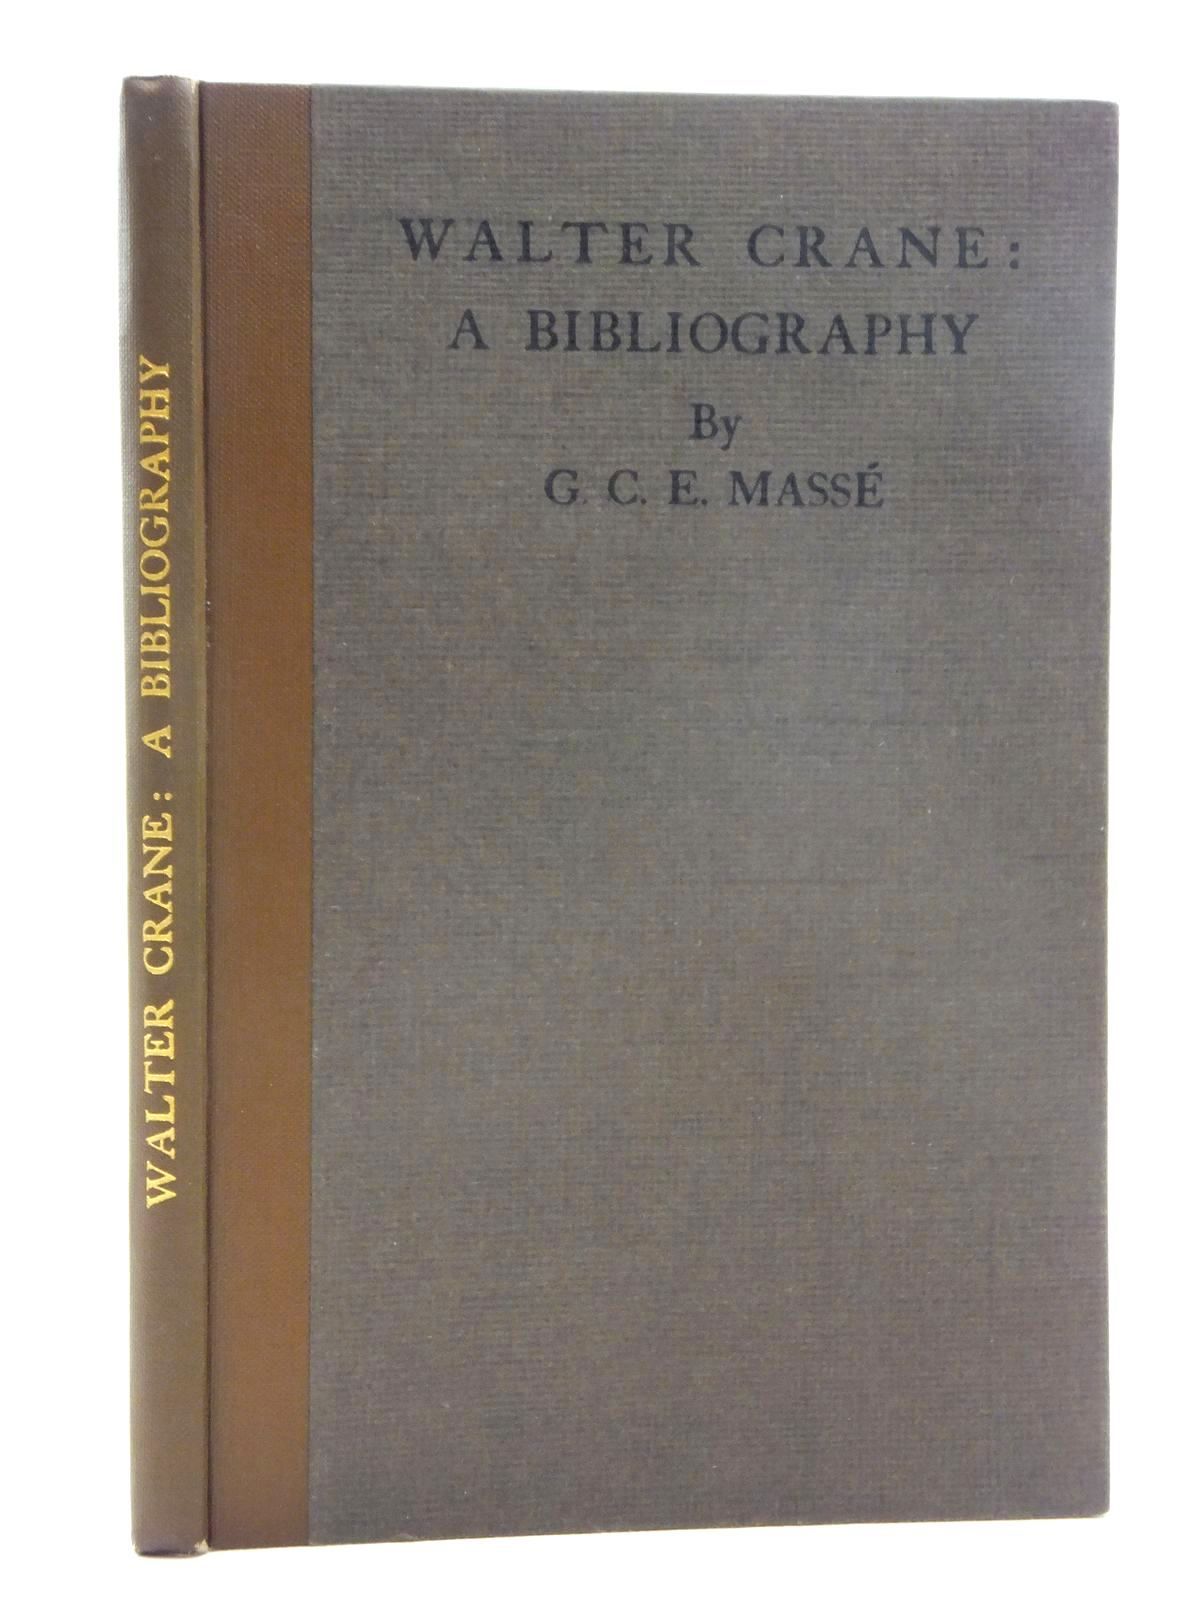 Photo of WALTER CRANE: A BIBLIOGRAPHY written by Masse, G.C.E. published by Chelsea Publishing Co. (STOCK CODE: 1316984)  for sale by Stella & Rose's Books